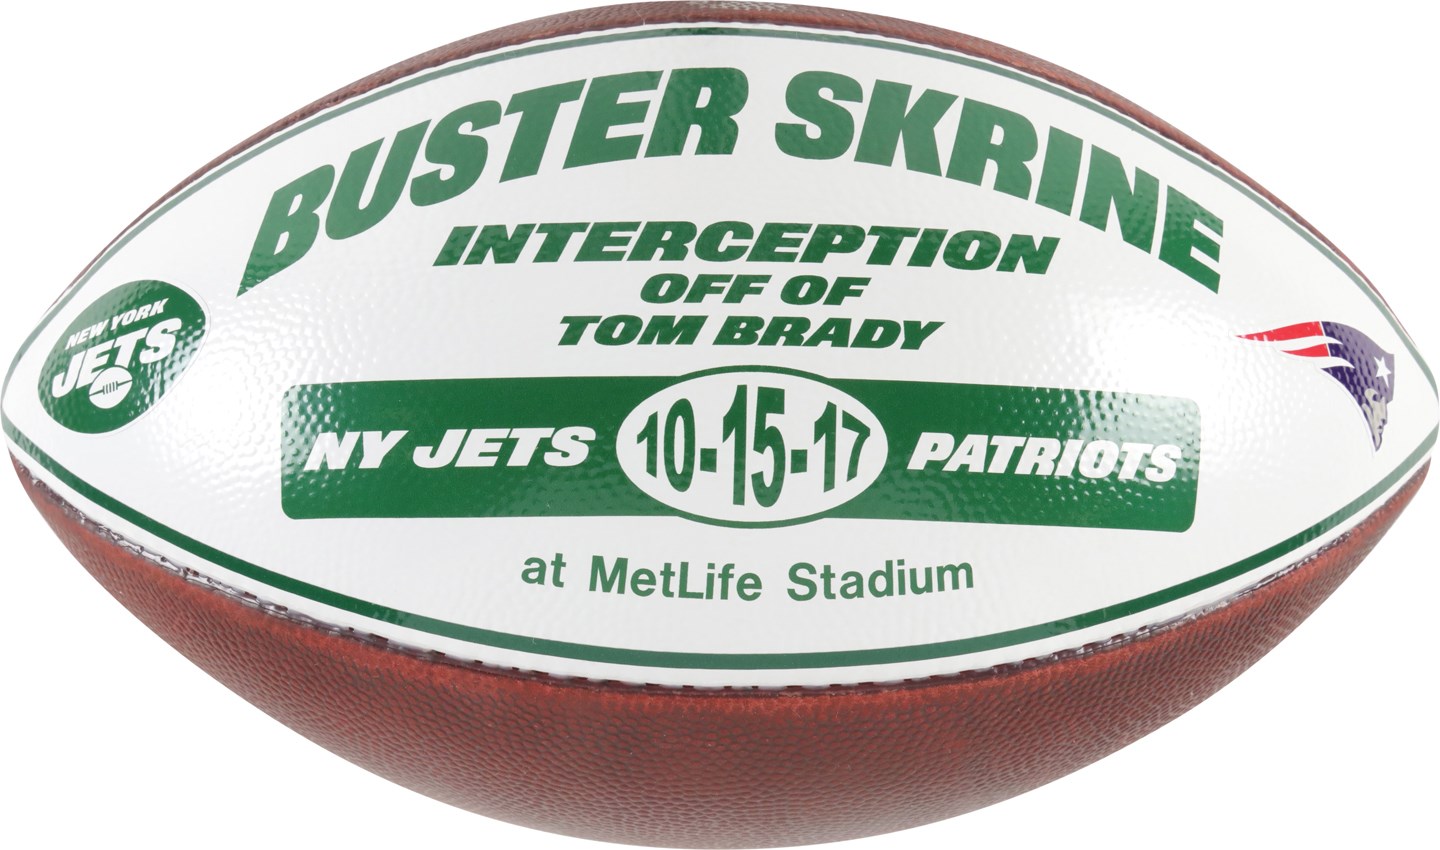 - 10/15/17 Tom Brady Game Used Interception Football to Buster Skrine from Record-Breaking Game - Brady Sets NFL Record for Most Regular Season Wins by a QB (Resolution Photo-Matched)